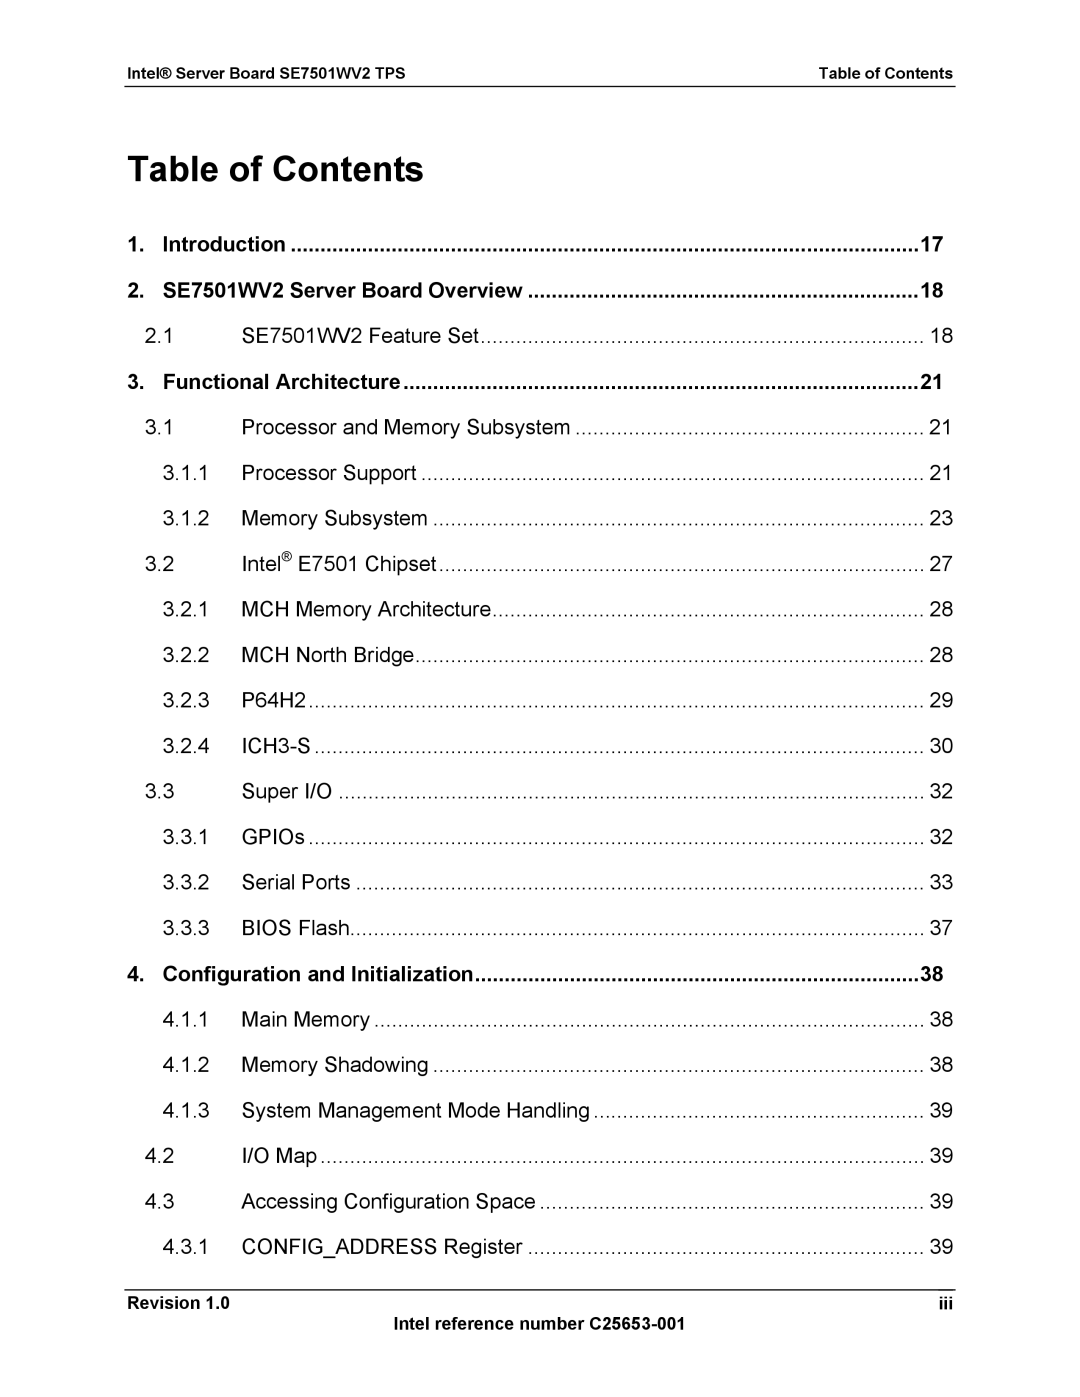 Intel SE7501WV2 manual Table of Contents 